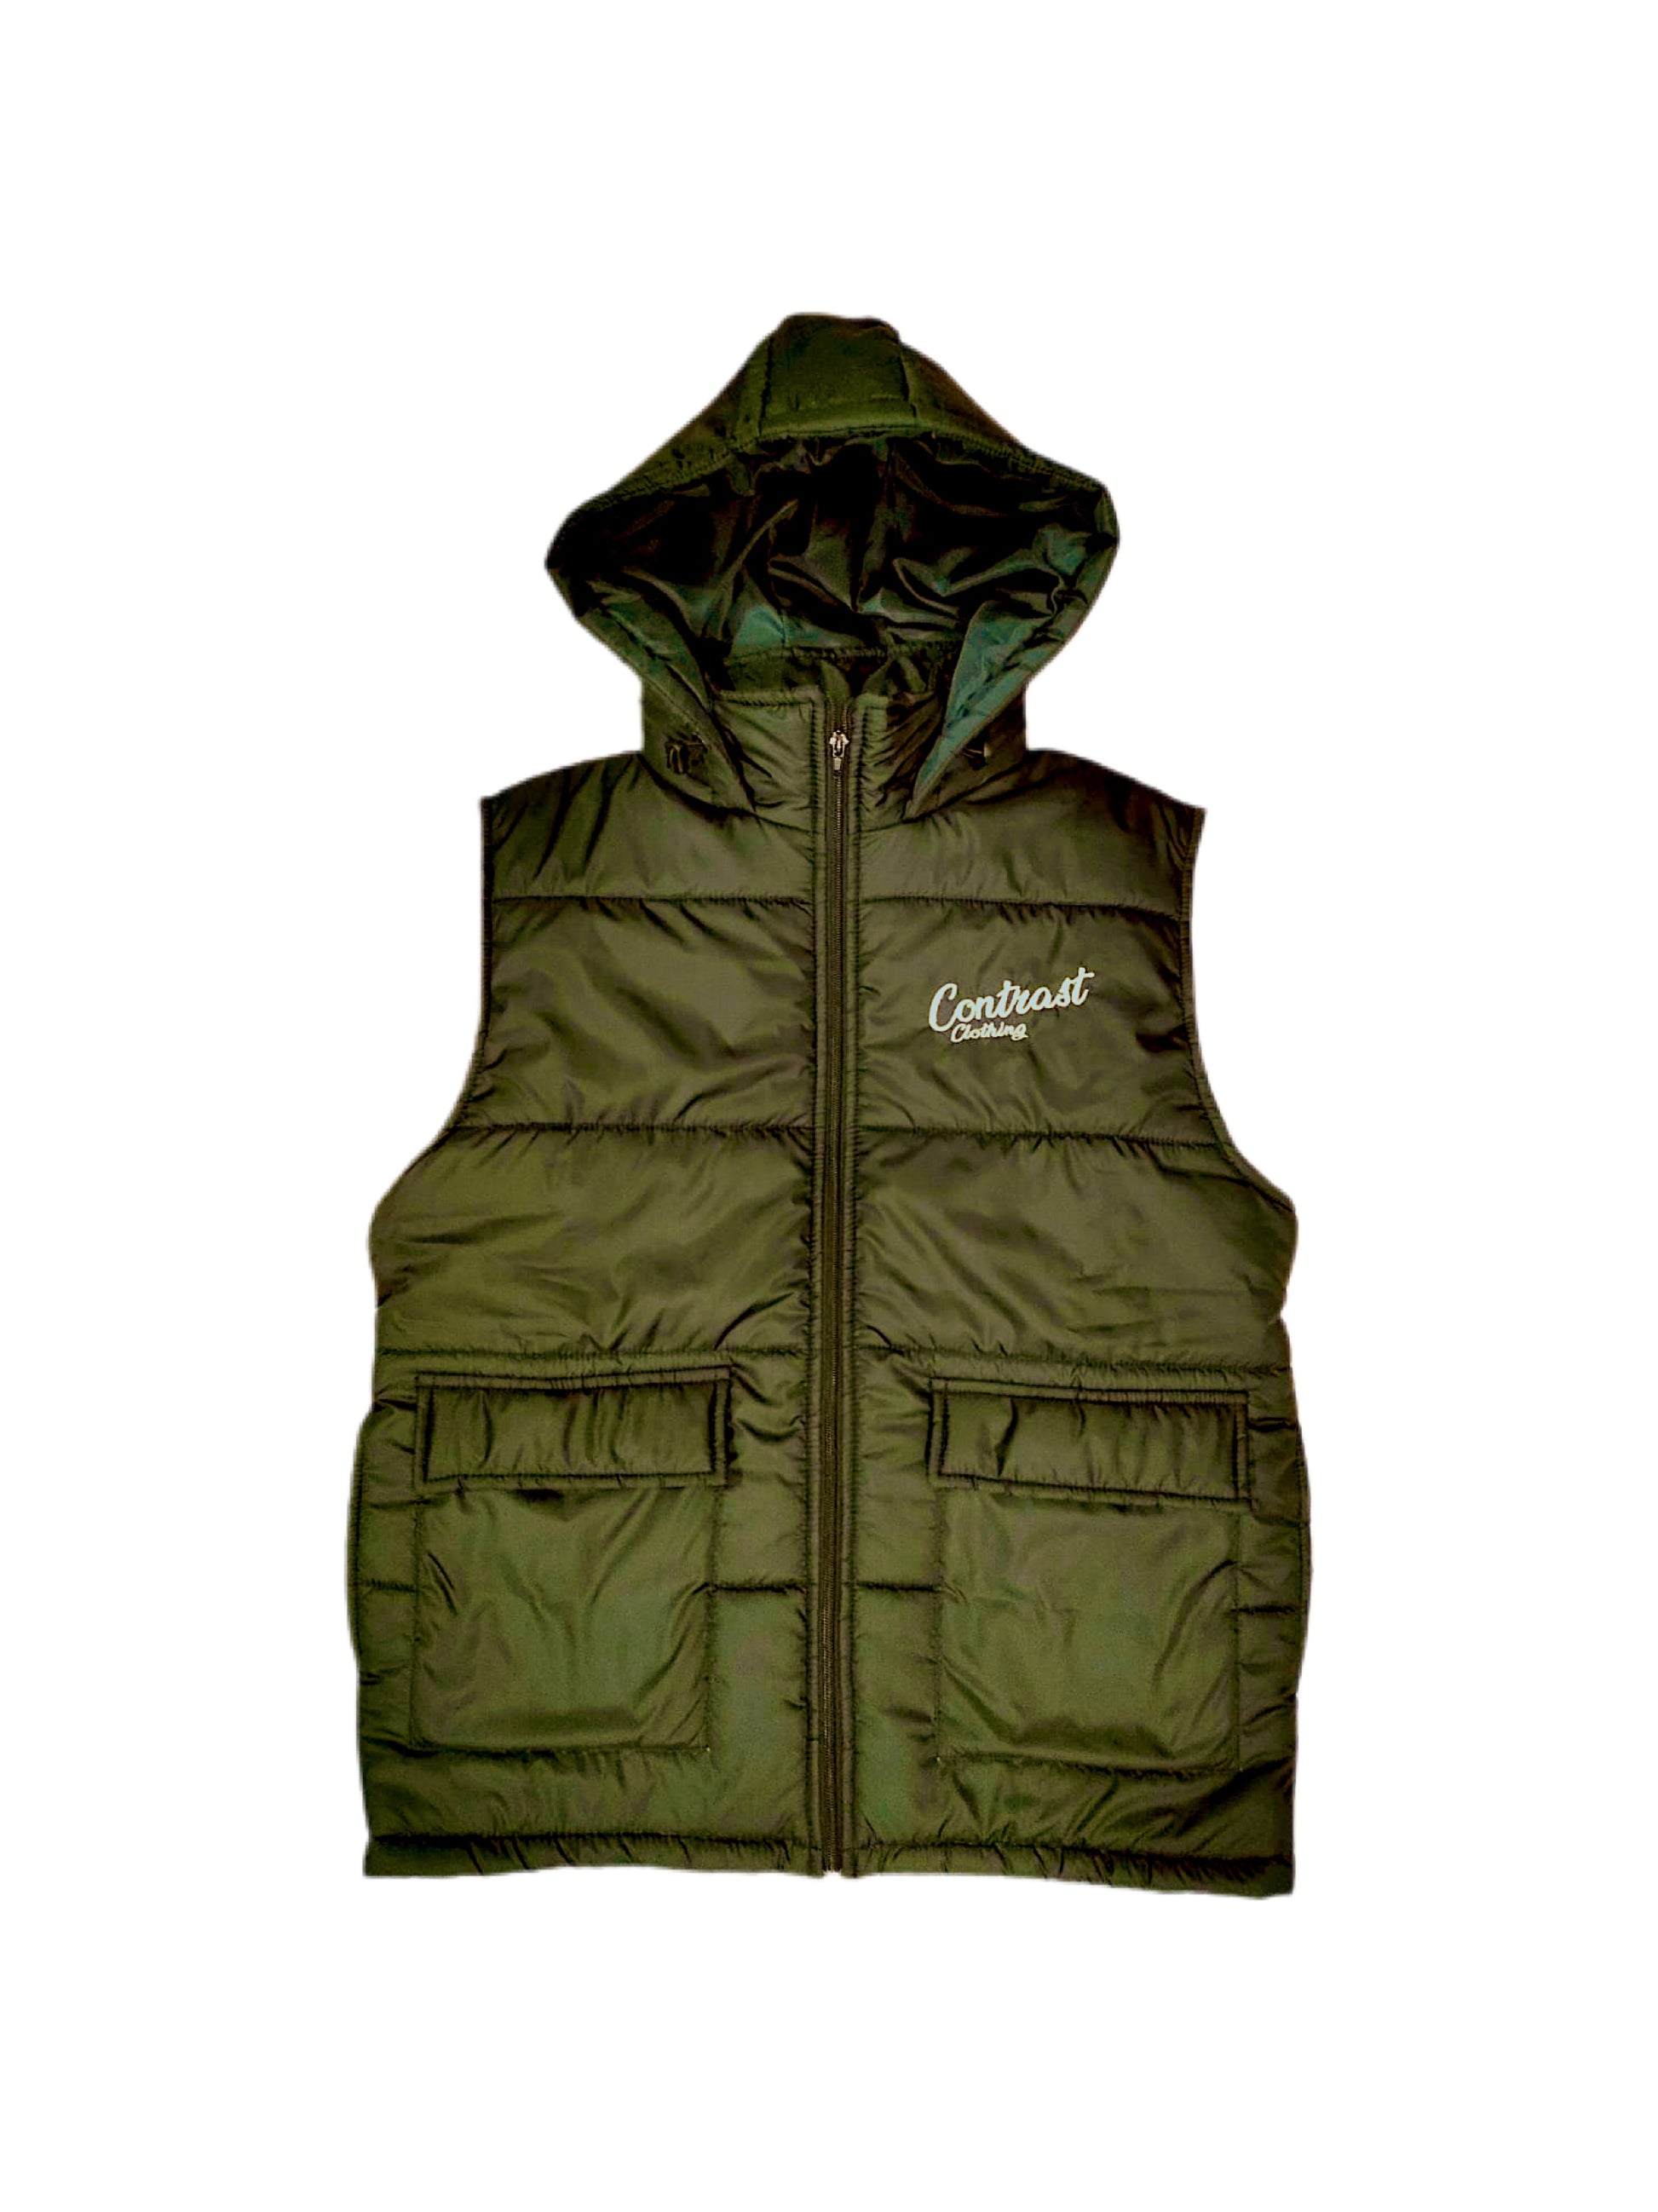 Contrast Clothing Worthing miliary green hooded gilet winter streetwear